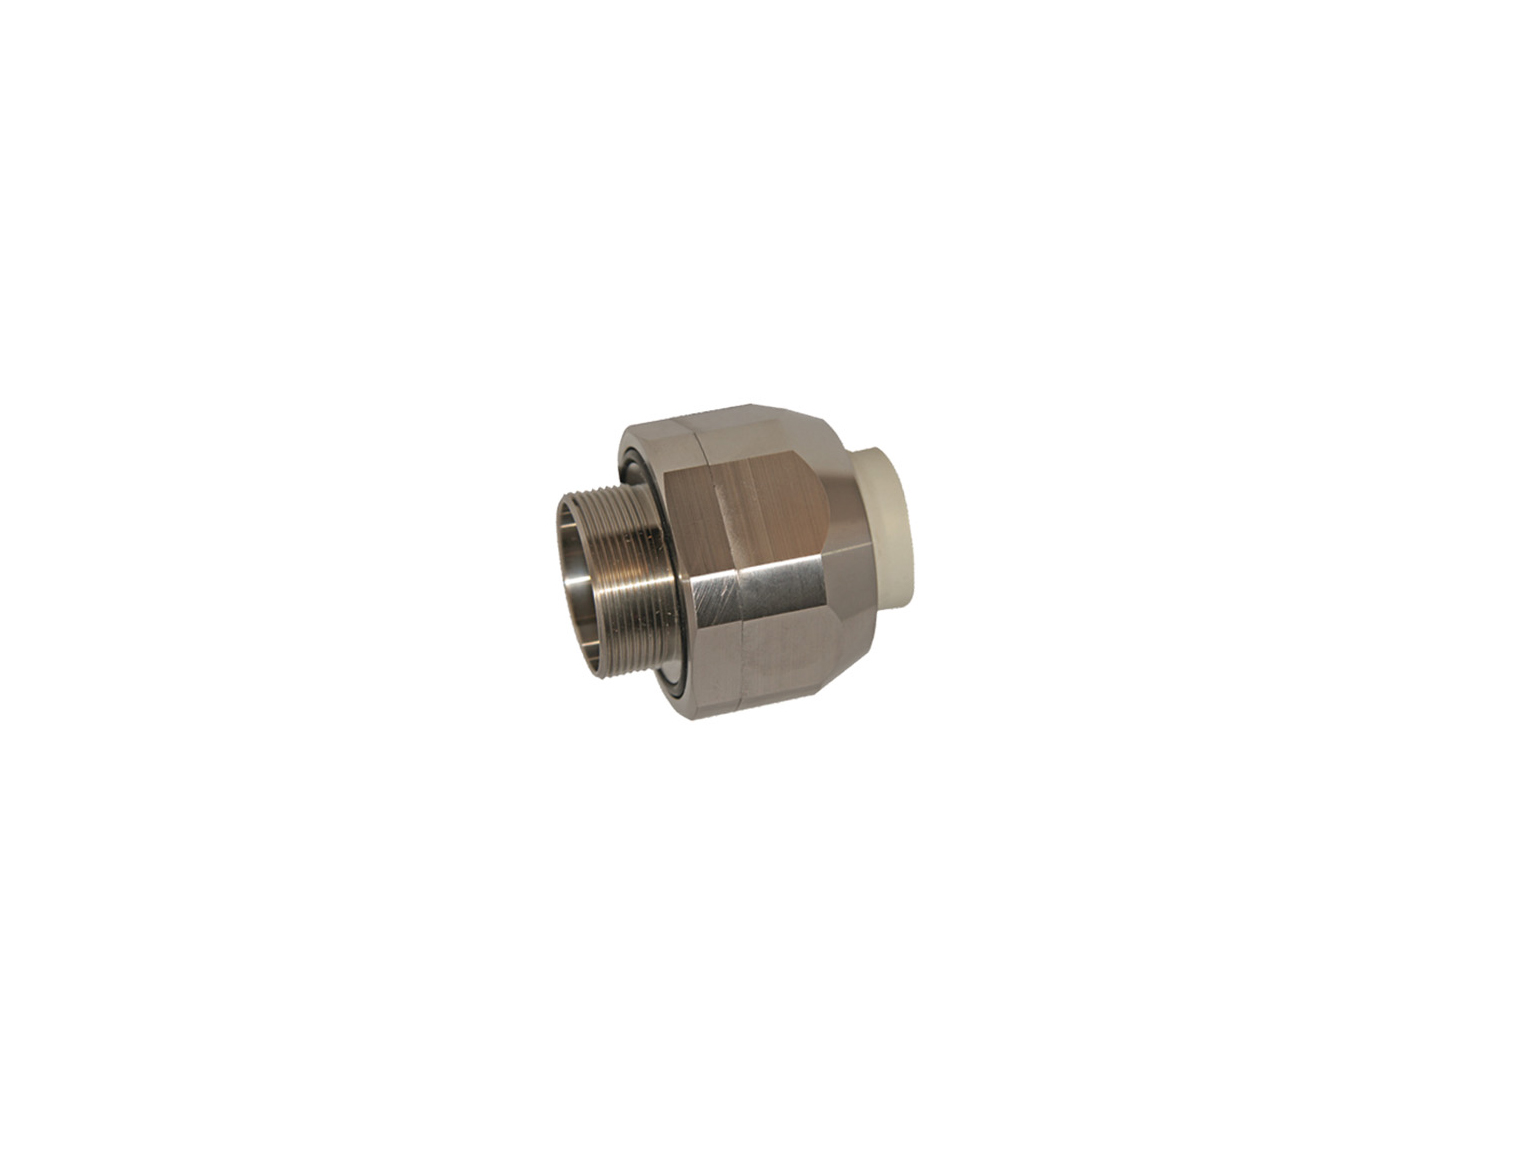 LT-CNP-E conduit gland stainless steel